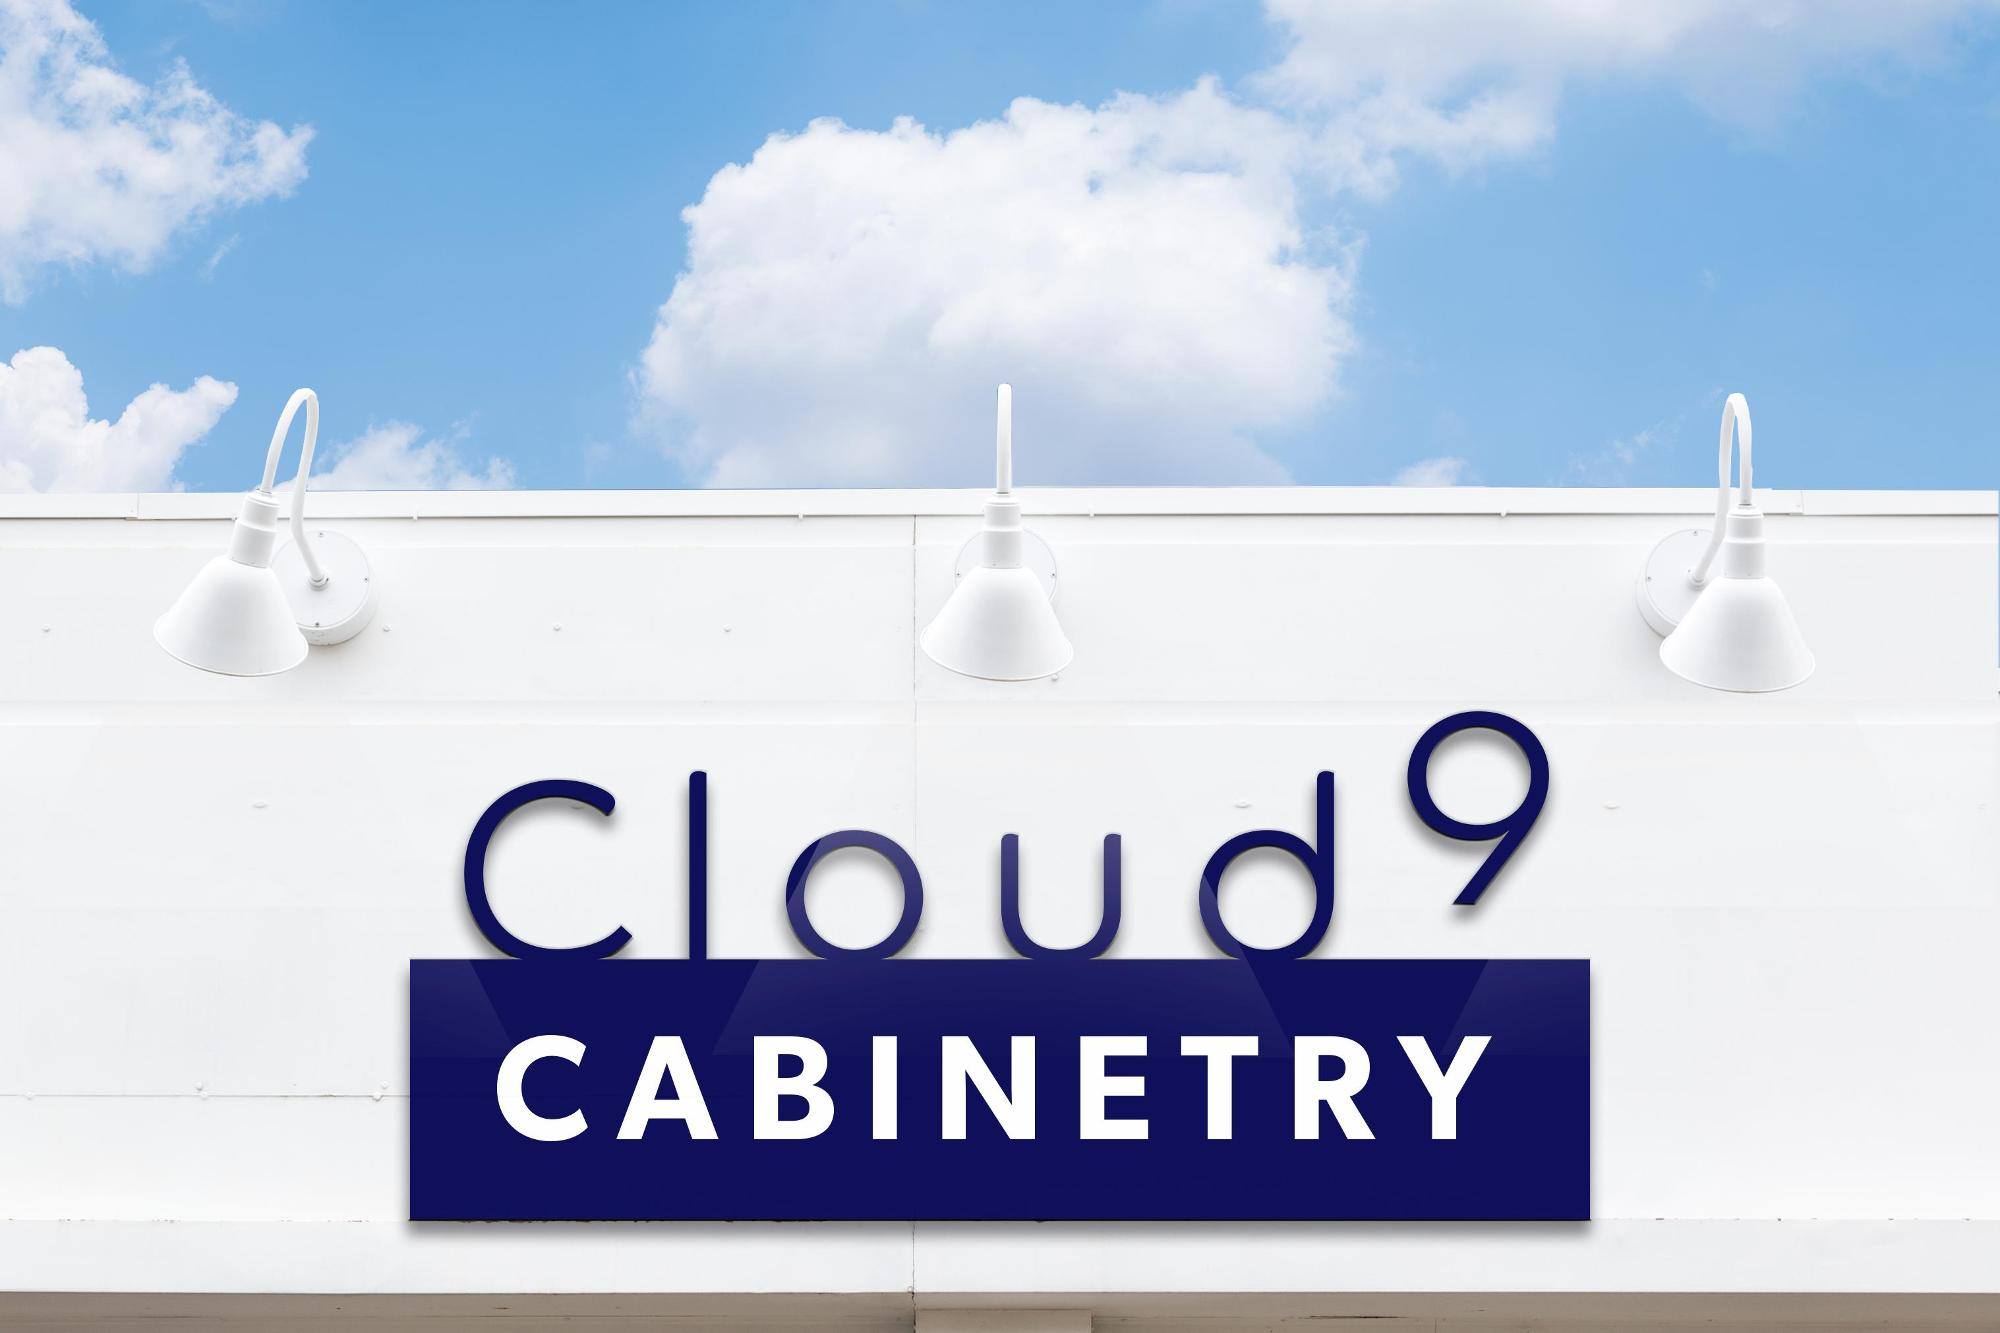 CLOUD 9 CABINETRY